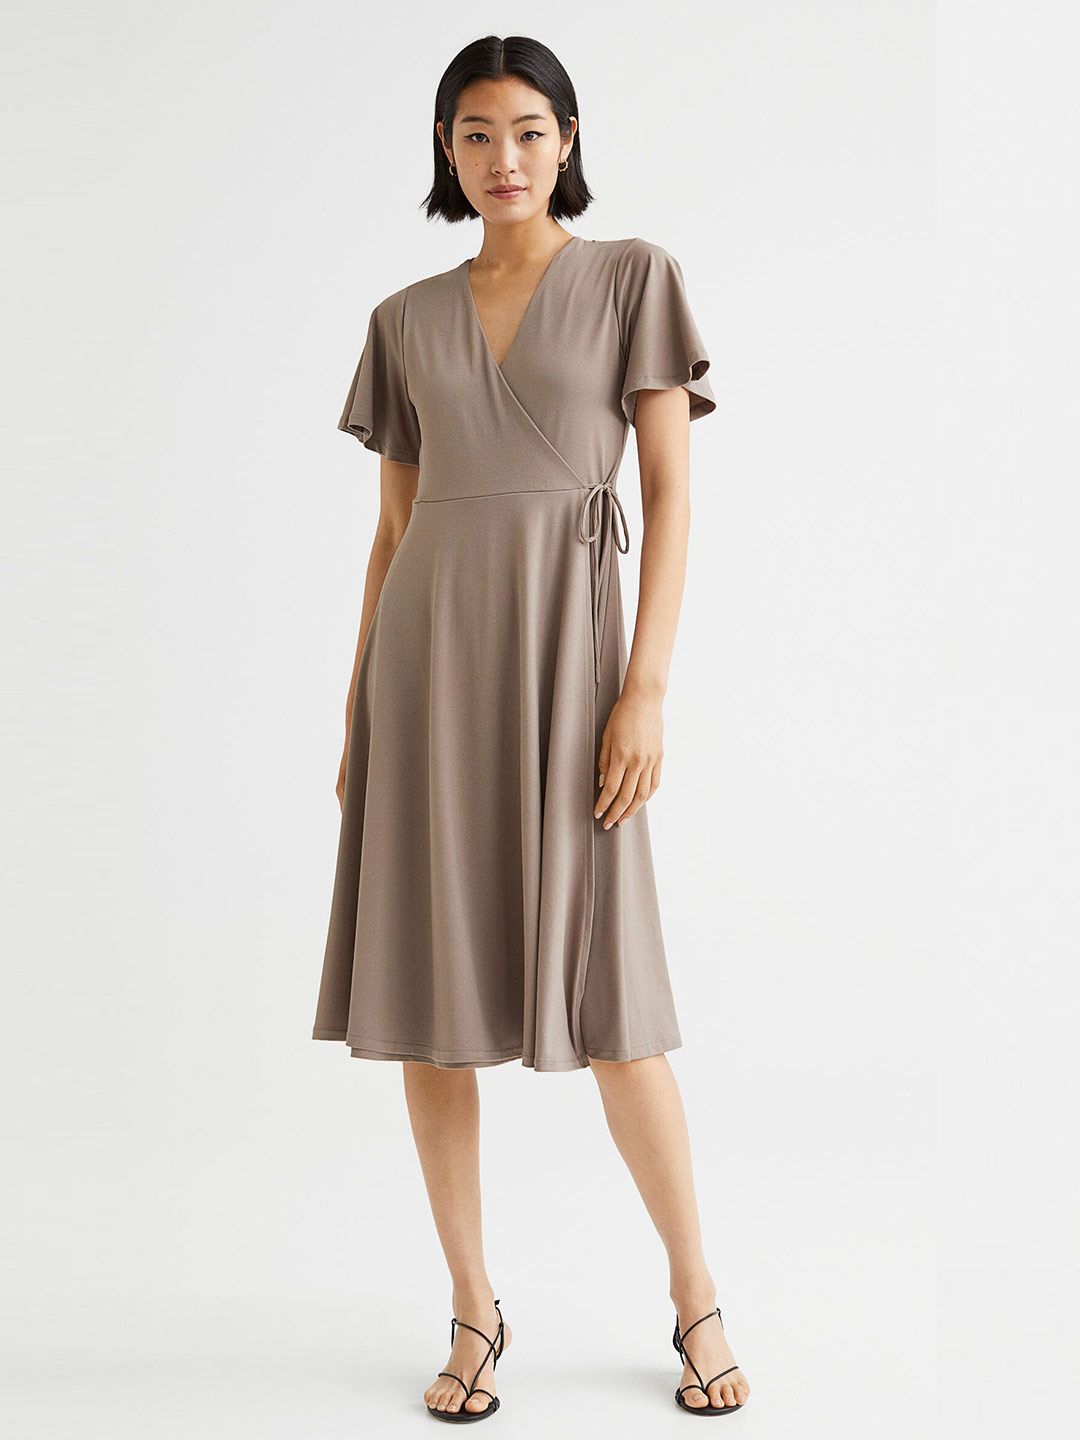 H&M Women Taupe Solid Wrap Dress Price in India